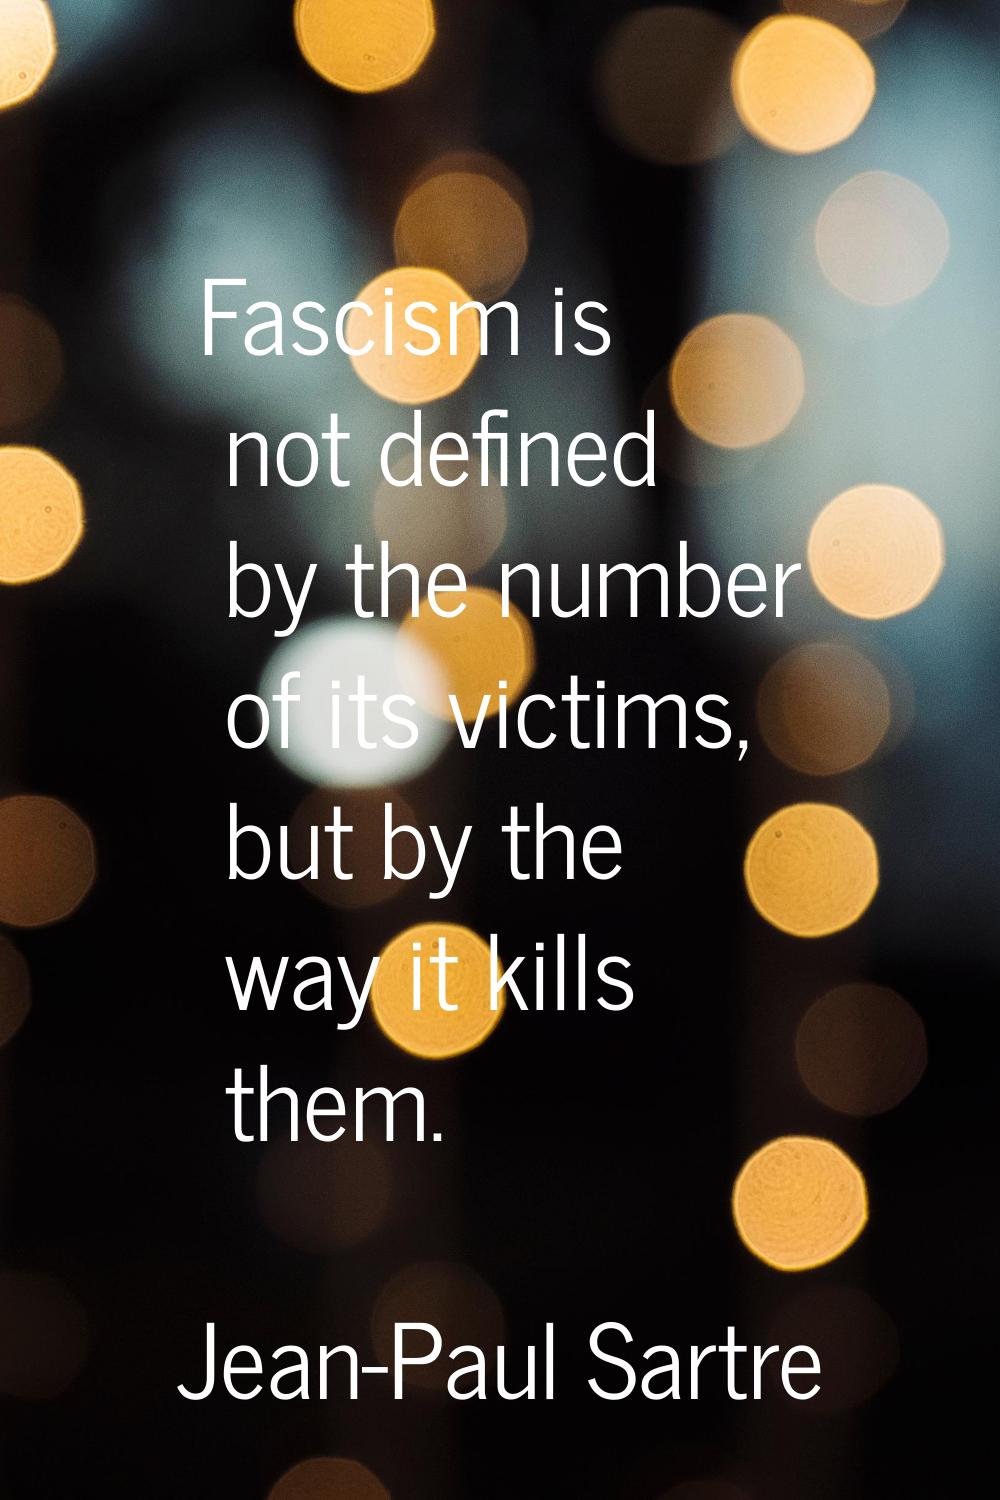 Fascism is not defined by the number of its victims, but by the way it kills them.